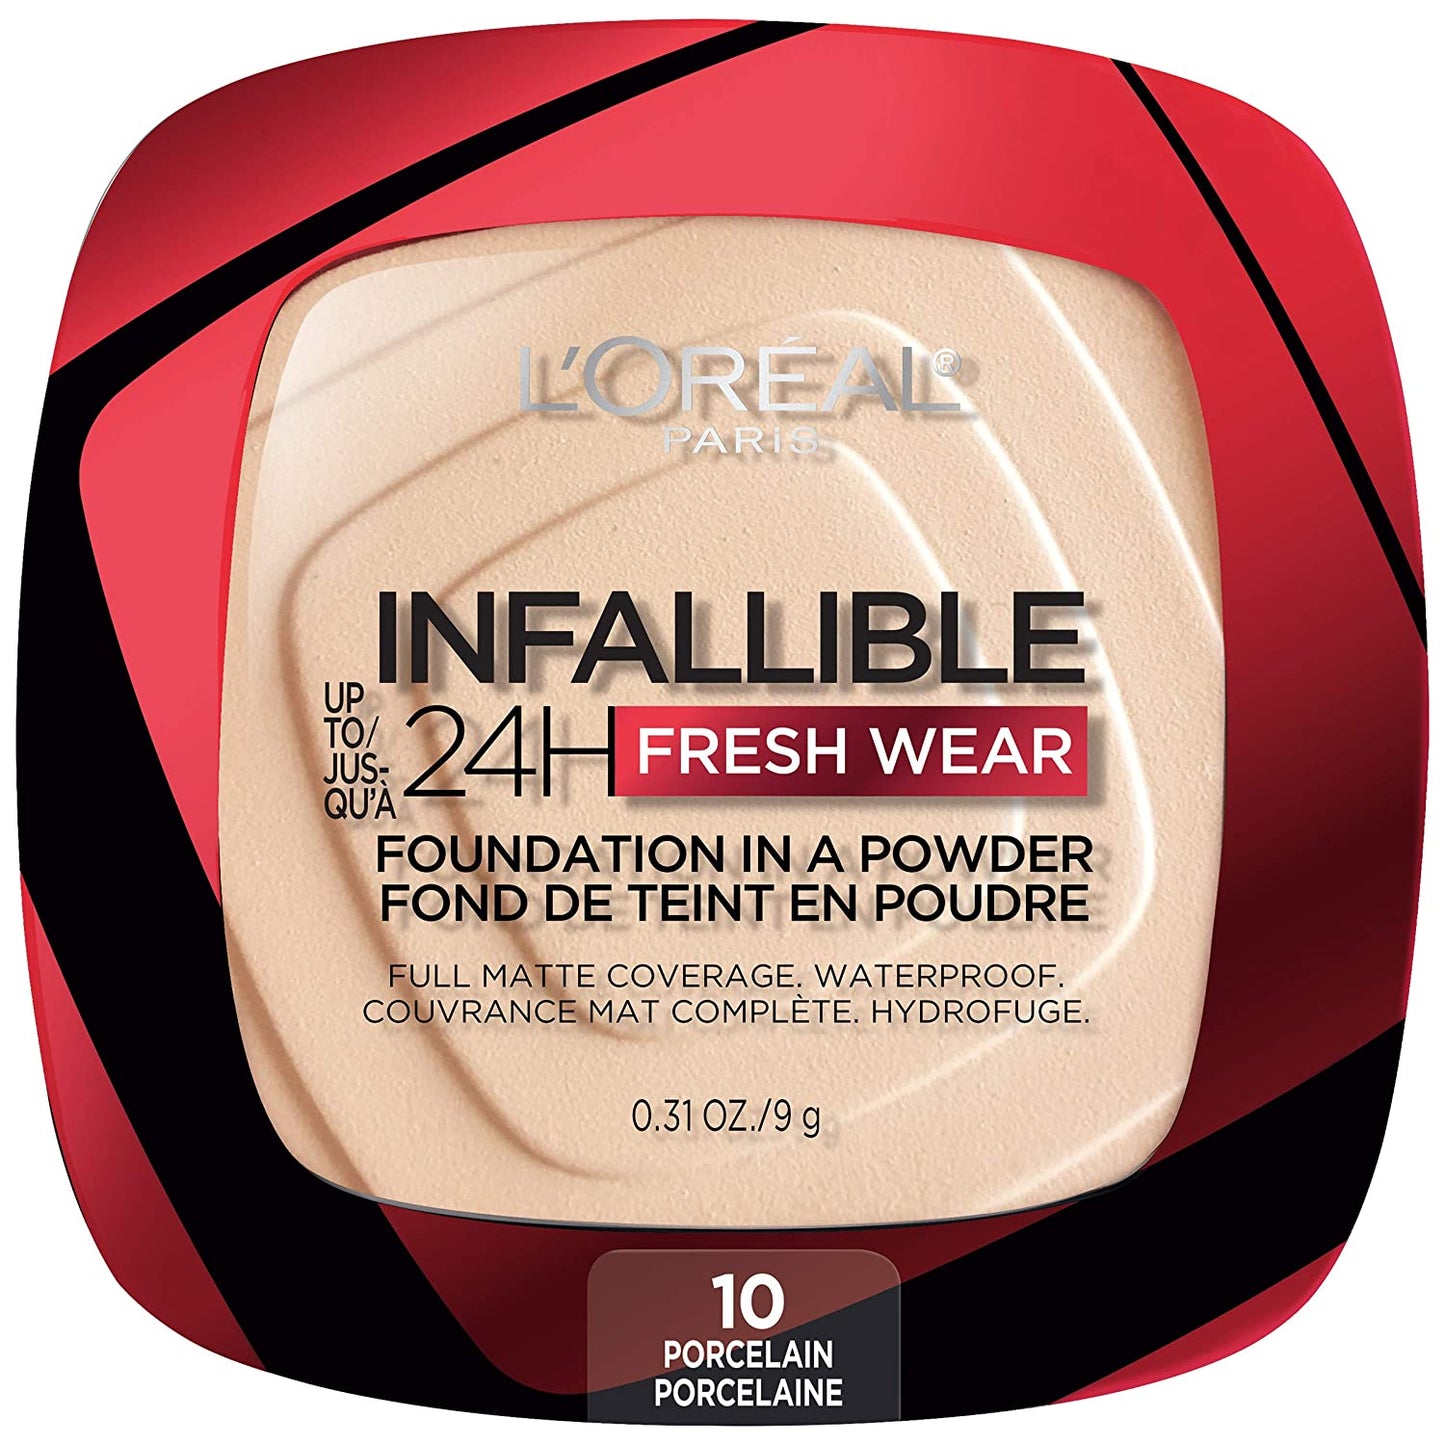 POLVO INFALLIBLE 24H 10 PORCELAIN - LOREAL - Adrissa Beauty - Maquillaje